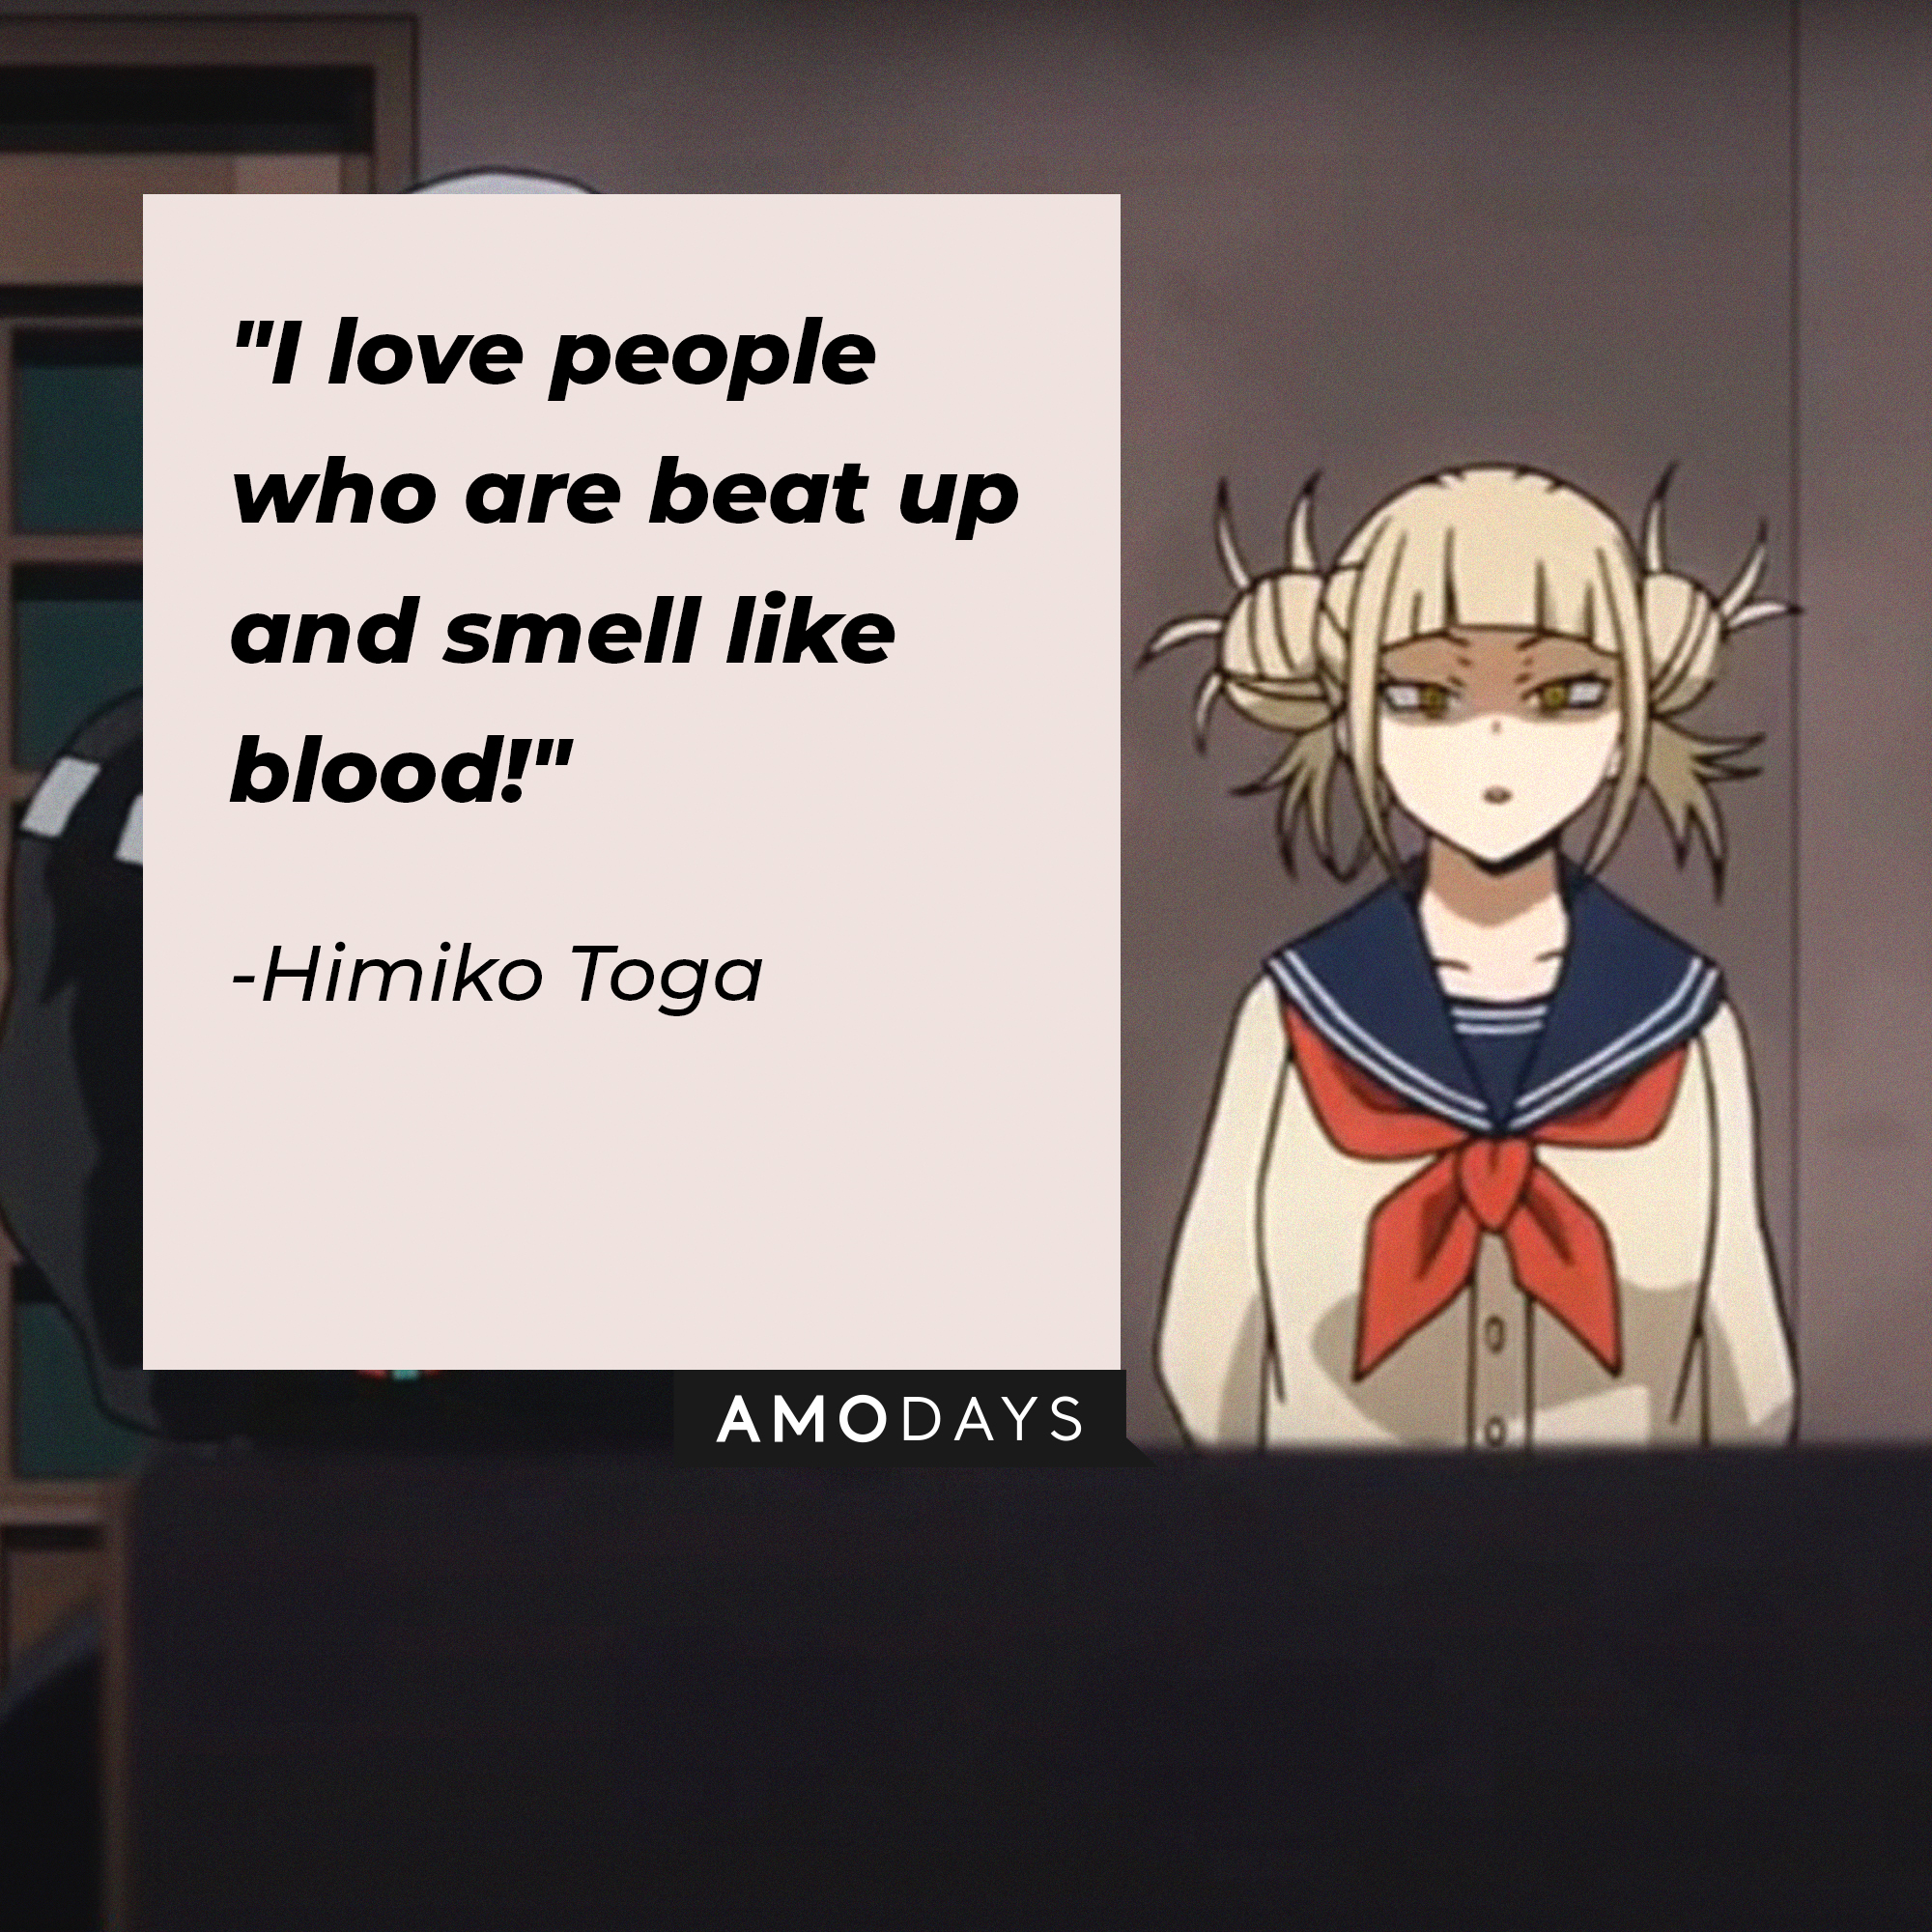 Himiko Toga’s quote: "I love people who are beat up and smell like blood!" | Image: AmoDays